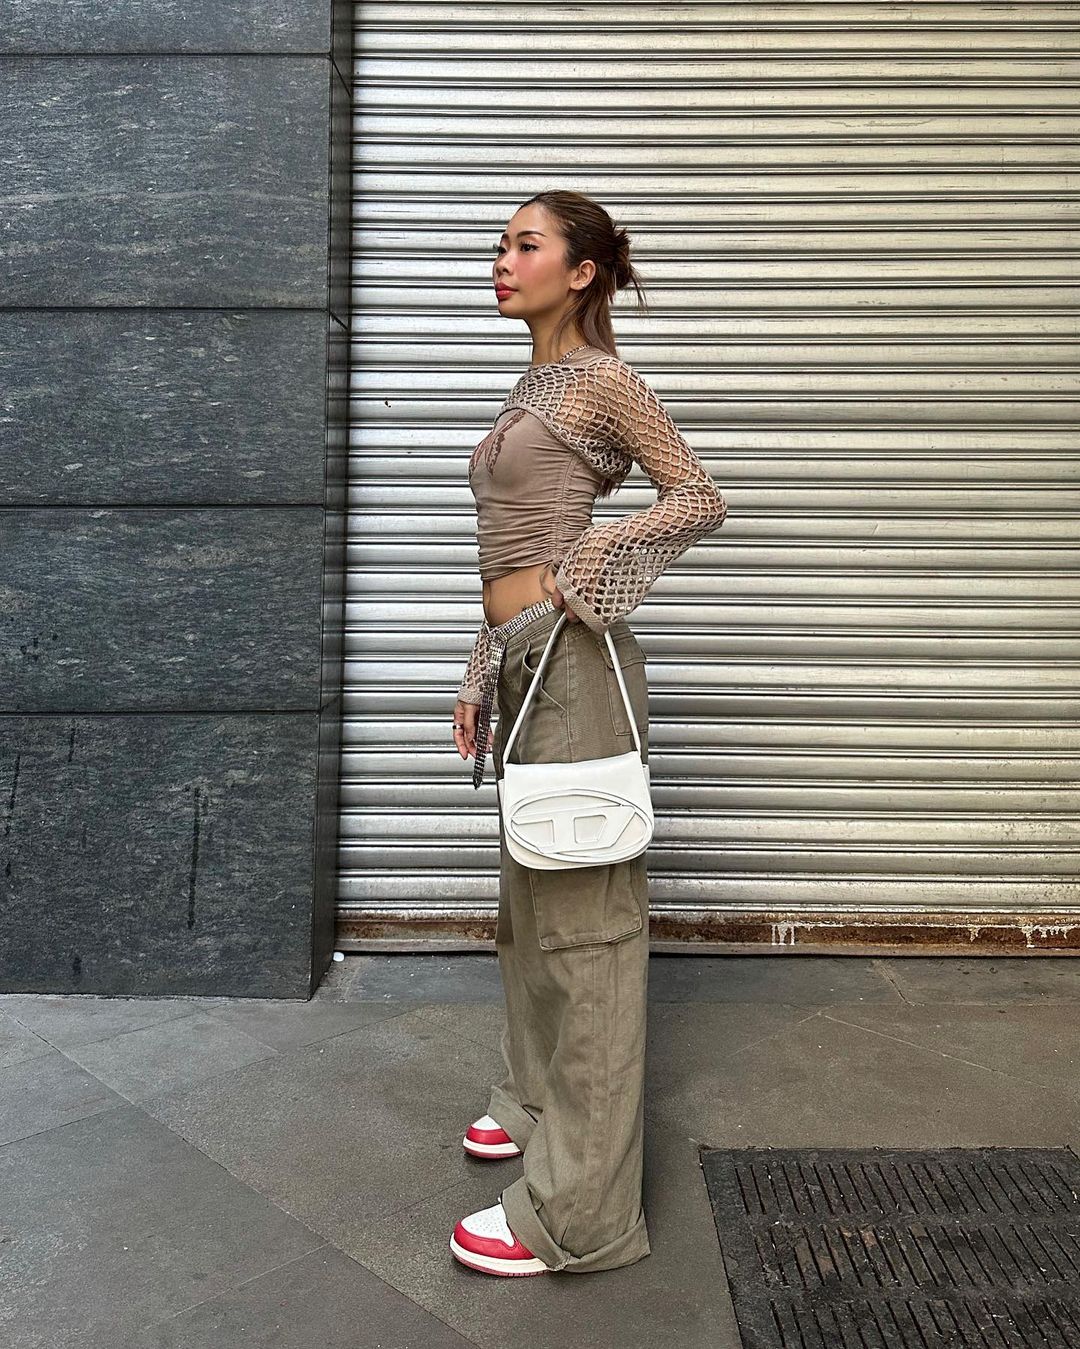 10 Ways To Style Cargo Pants, As Seen On Celebrities And Influencers